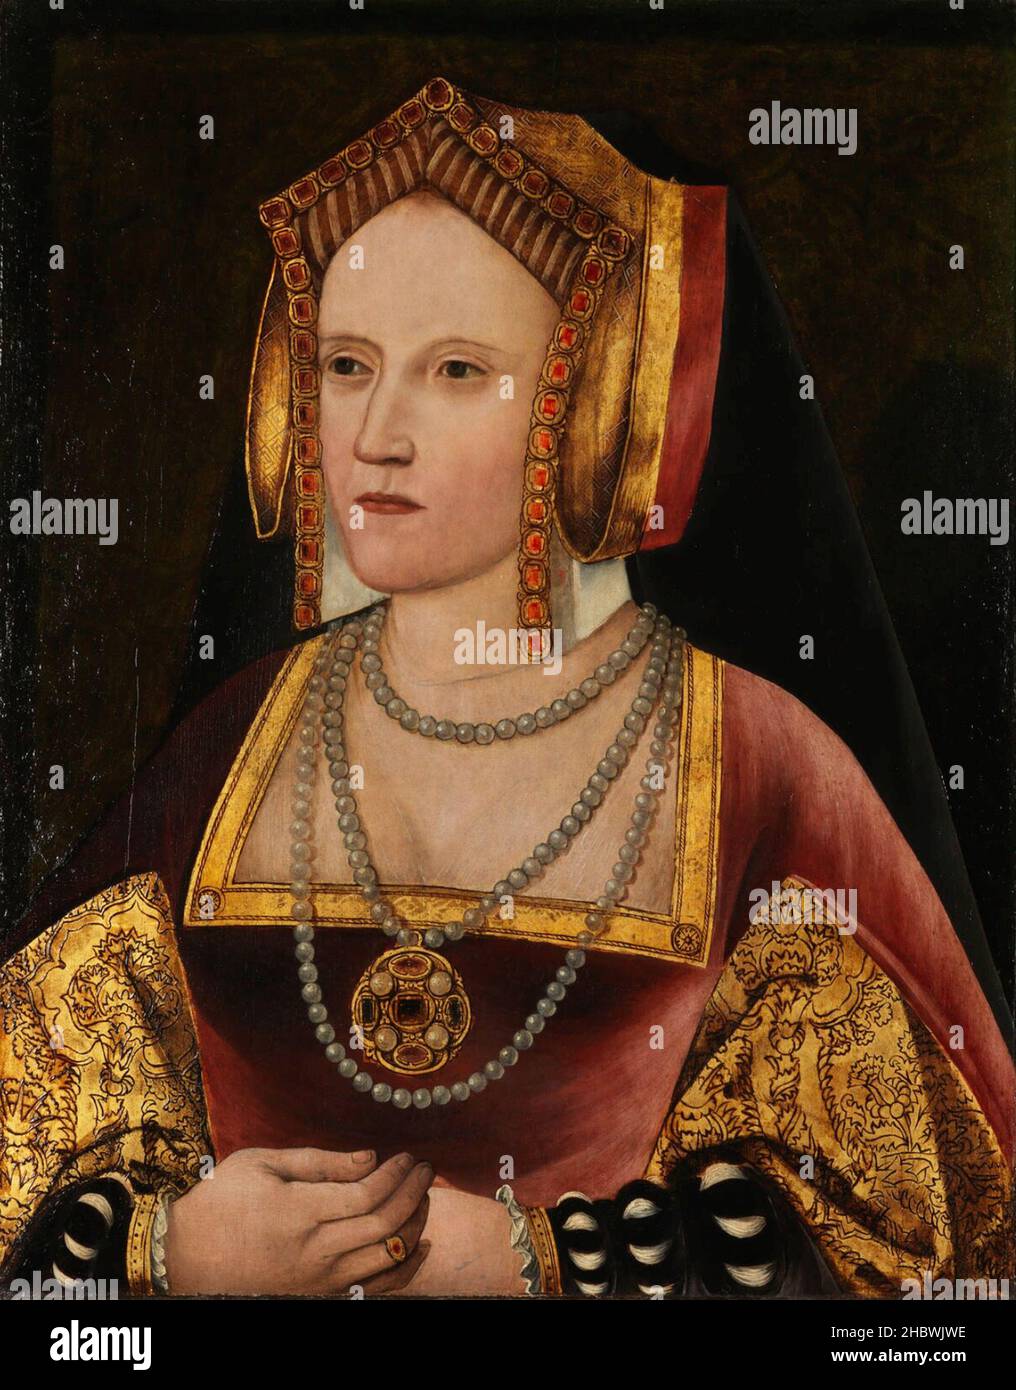 A portrait of Catherine of Aragon, the first wife of King Henry VIII Stock Photo